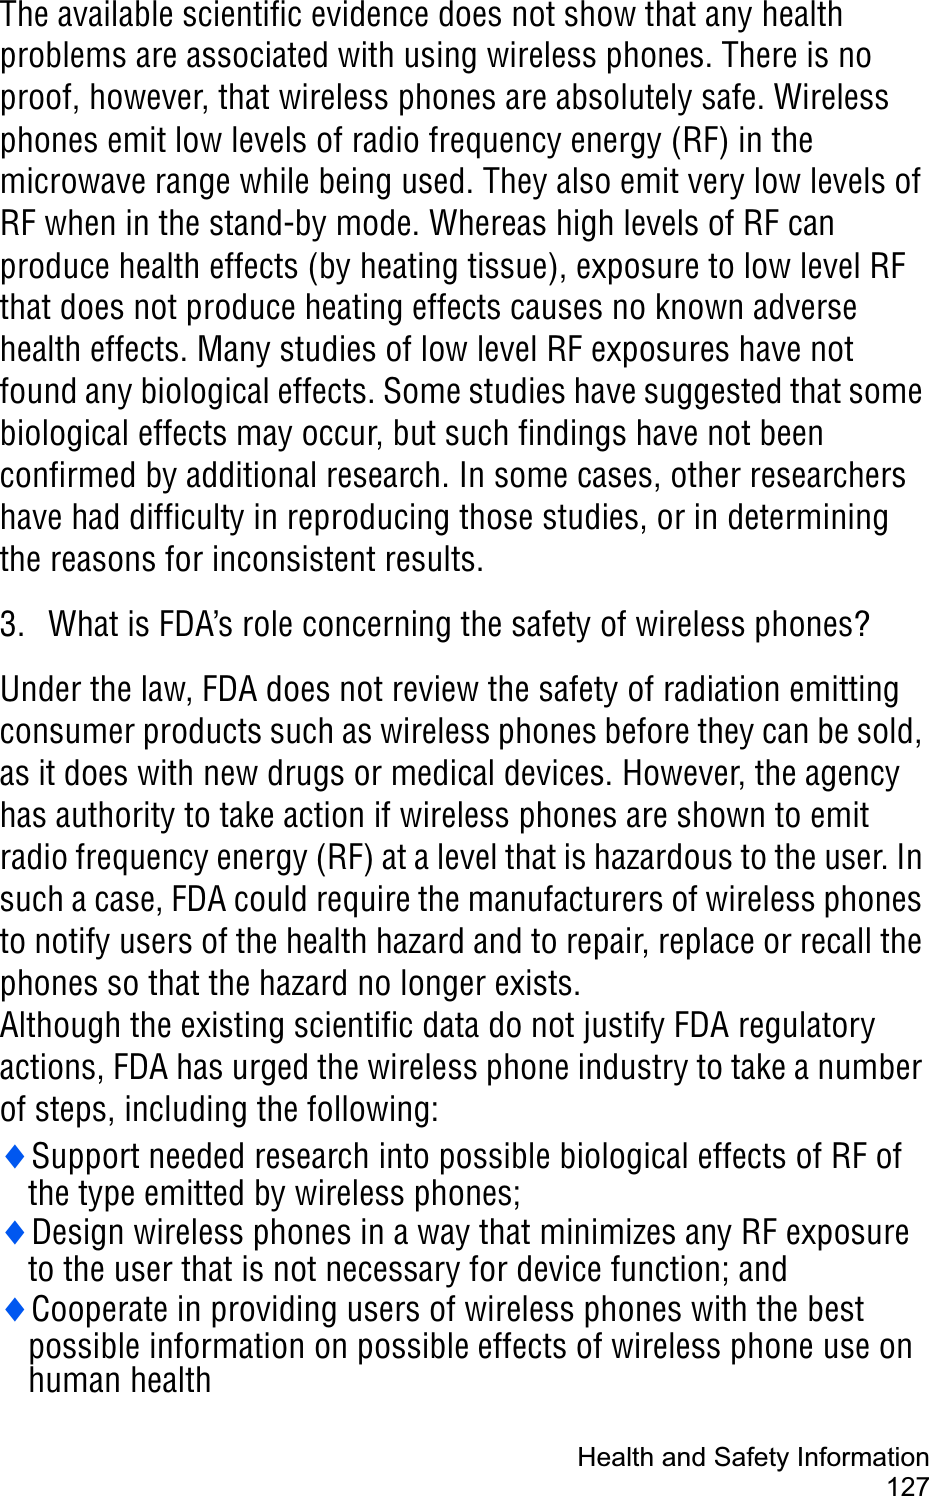 Health and Safety Information127The available scientific evidence does not show that any health problems are associated with using wireless phones. There is no proof, however, that wireless phones are absolutely safe. Wireless phones emit low levels of radio frequency energy (RF) in the microwave range while being used. They also emit very low levels of RF when in the stand-by mode. Whereas high levels of RF can produce health effects (by heating tissue), exposure to low level RF that does not produce heating effects causes no known adverse health effects. Many studies of low level RF exposures have not found any biological effects. Some studies have suggested that some biological effects may occur, but such findings have not been confirmed by additional research. In some cases, other researchers have had difficulty in reproducing those studies, or in determining the reasons for inconsistent results.3. What is FDA’s role concerning the safety of wireless phones?Under the law, FDA does not review the safety of radiation emitting consumer products such as wireless phones before they can be sold, as it does with new drugs or medical devices. However, the agency has authority to take action if wireless phones are shown to emit radio frequency energy (RF) at a level that is hazardous to the user. In such a case, FDA could require the manufacturers of wireless phones to notify users of the health hazard and to repair, replace or recall the phones so that the hazard no longer exists.Although the existing scientific data do not justify FDA regulatory actions, FDA has urged the wireless phone industry to take a number of steps, including the following:iSupport needed research into possible biological effects of RF of the type emitted by wireless phones;iDesign wireless phones in a way that minimizes any RF exposure to the user that is not necessary for device function; andiCooperate in providing users of wireless phones with the best possible information on possible effects of wireless phone use on human health